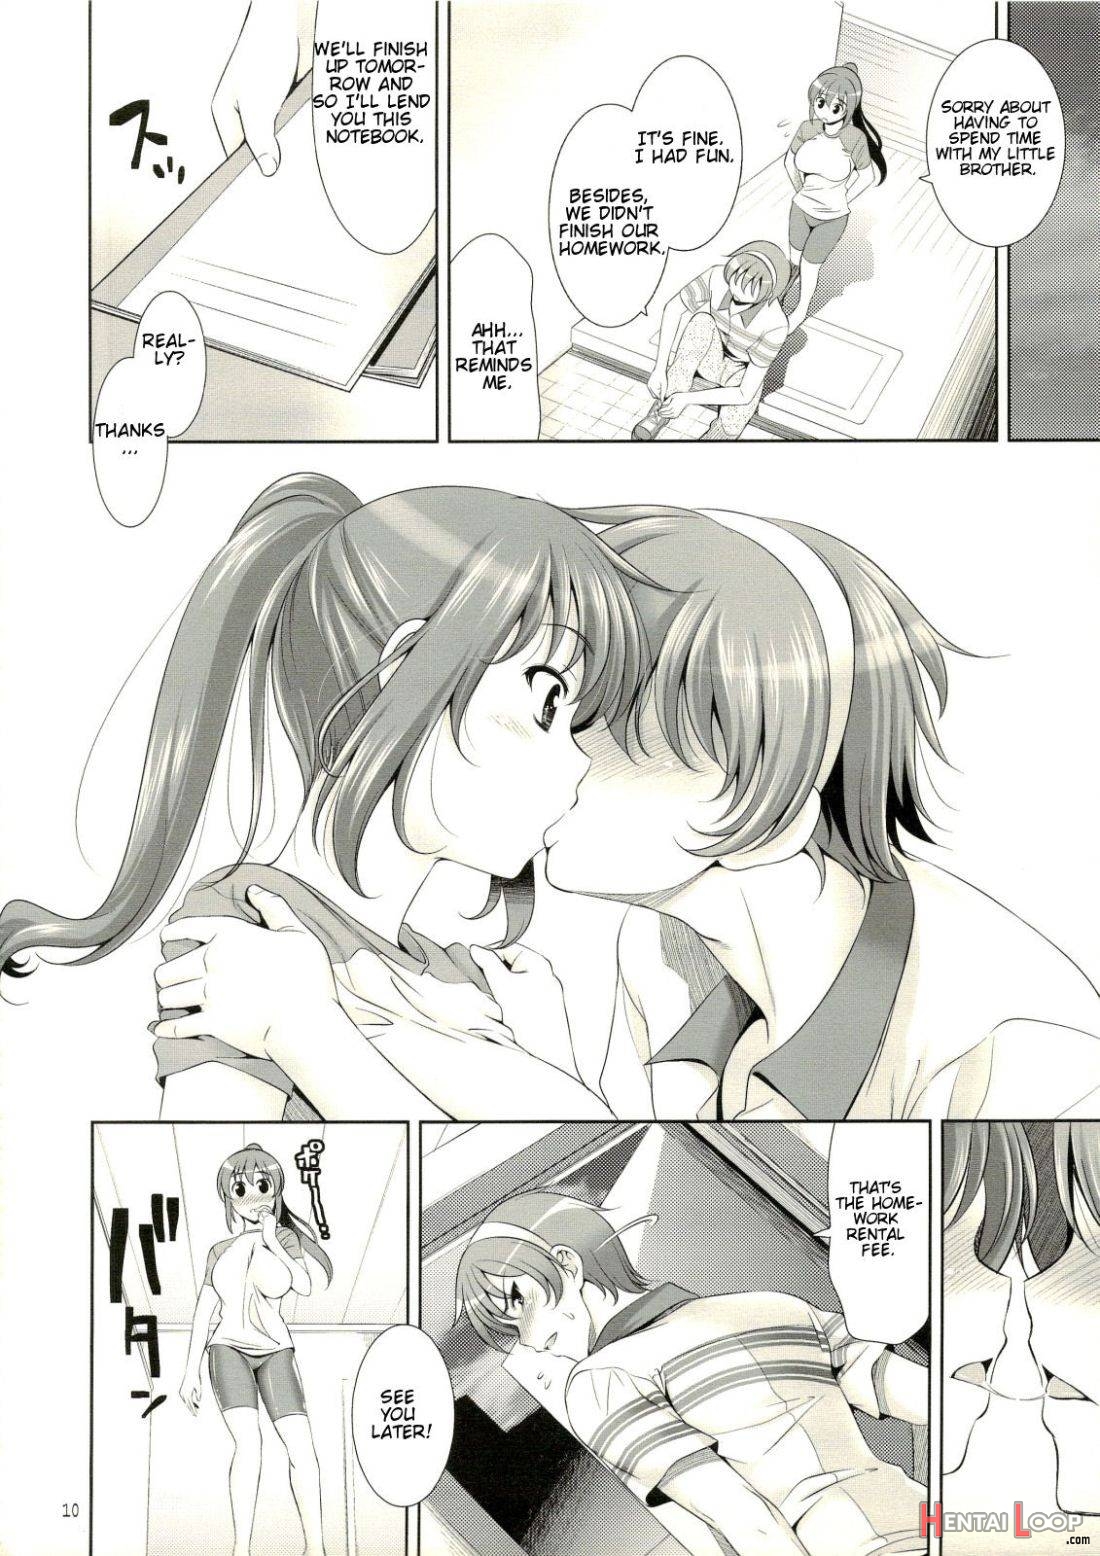 Manatsu no Yo no Yume no Mata Yume no Mata Yume page 7